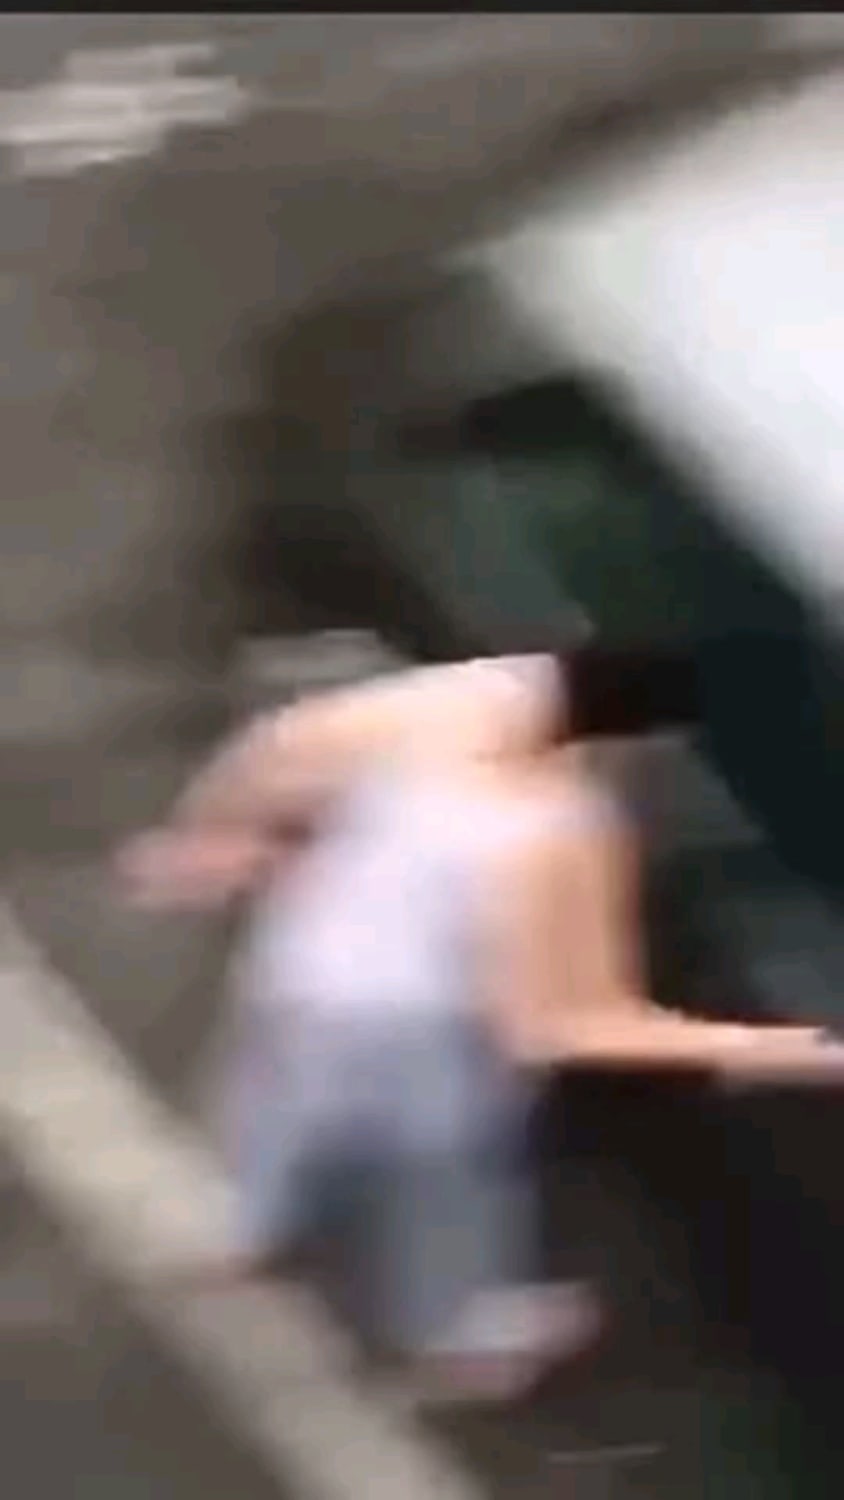 Angry woman attacks car, gets taken out by a dude